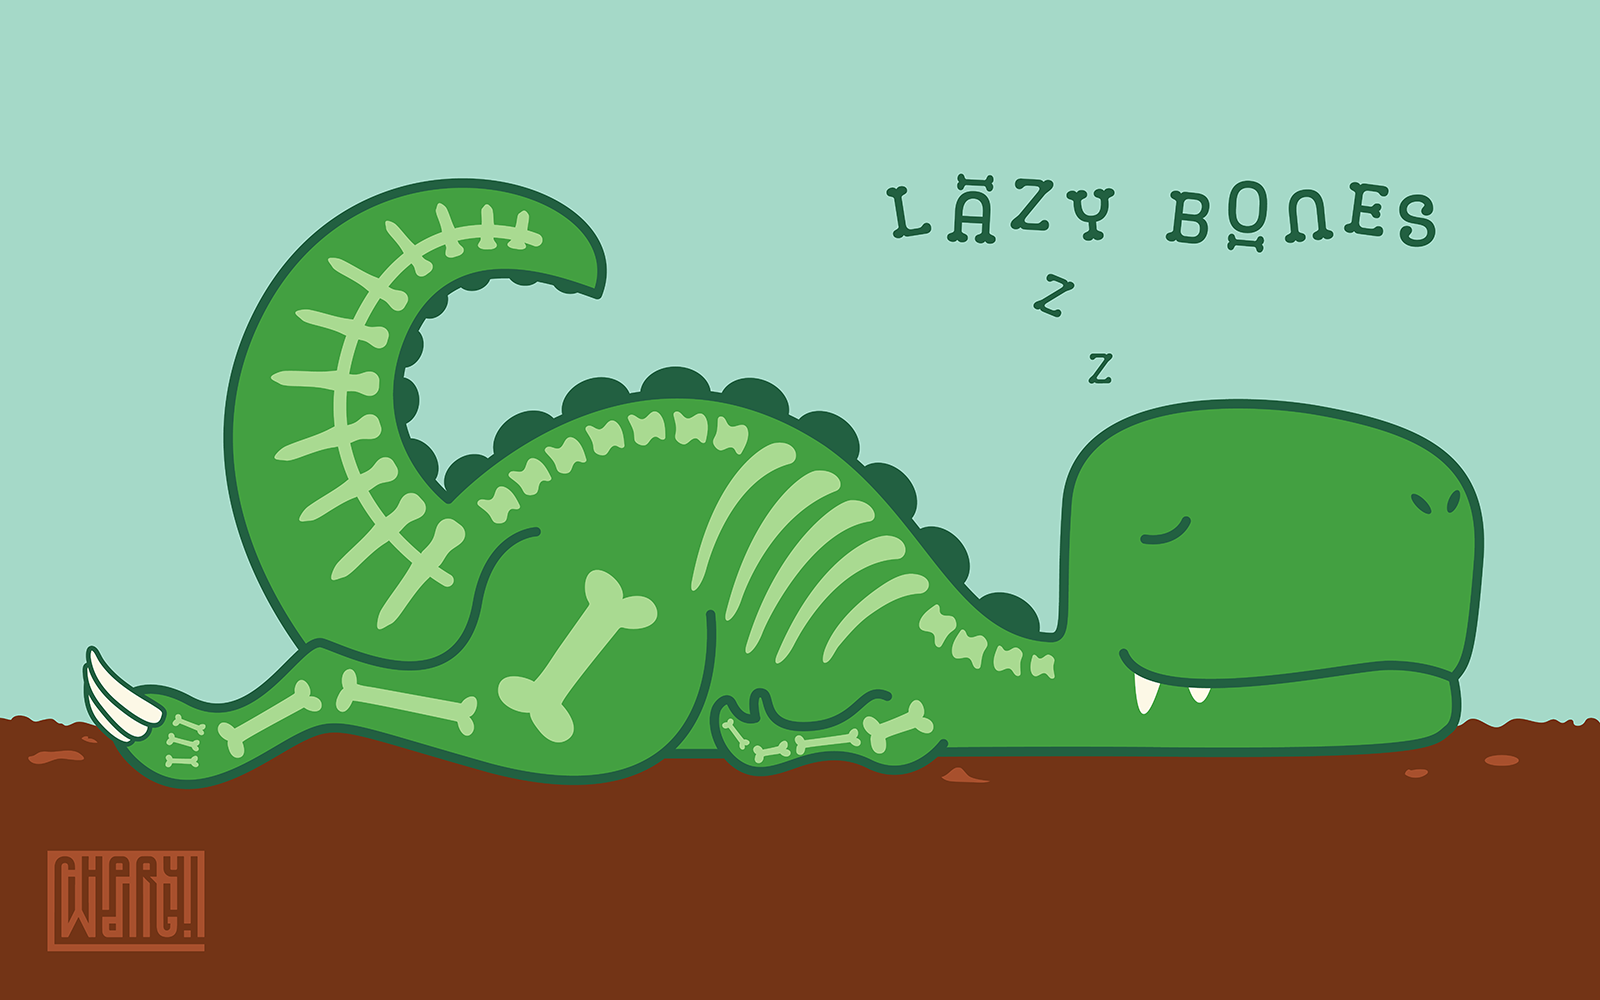 Skeletal t-rex sleeping with the caption "Bone Tired"